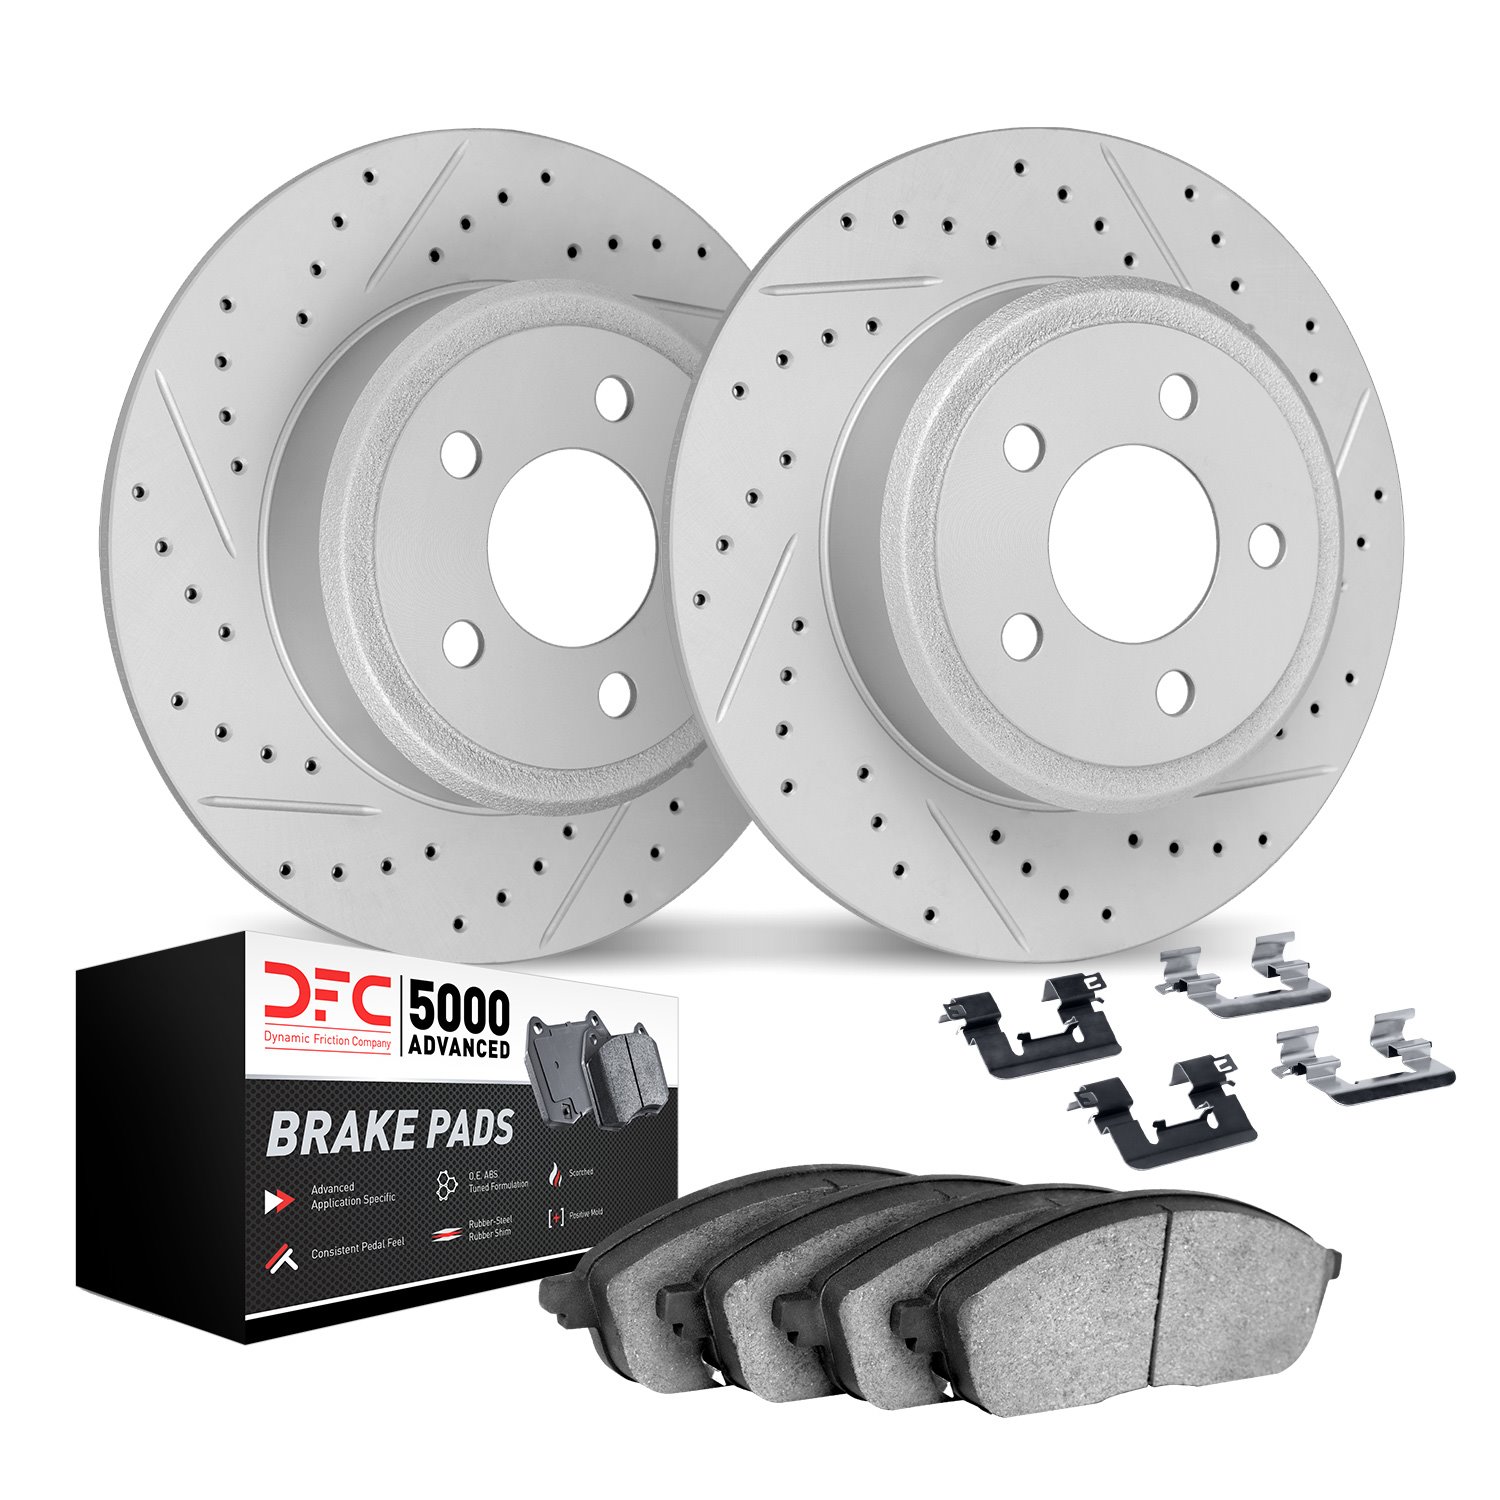 2512-54177 Geoperformance Drilled/Slotted Rotors w/5000 Advanced Brake Pads Kit & Hardware, Fits Select Ford/Lincoln/Mercury/Maz